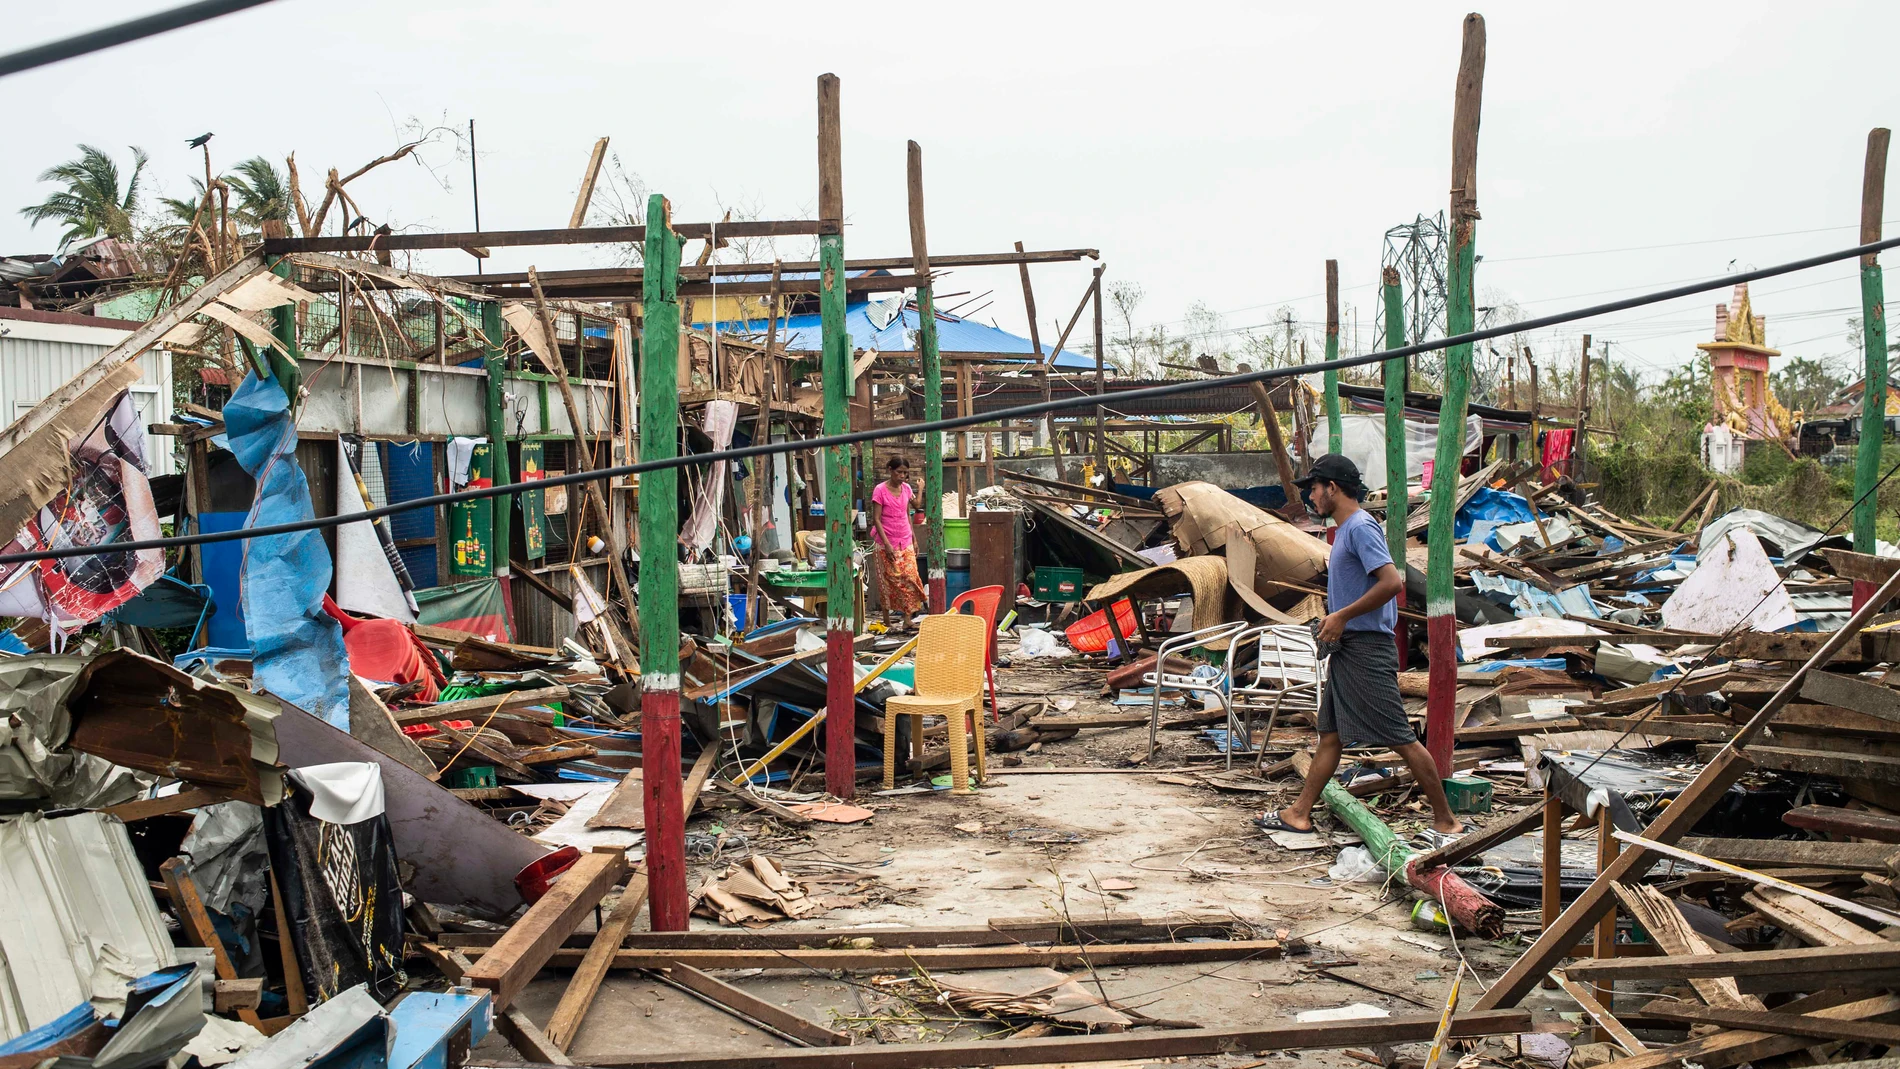 Local residents walk past damaged buildings after Cyclone Mocha in Sittwe township, Rakhine State, Myanmar, Tuesday, May 16, 2023. Myanmar’s military information office said the storm had damaged houses and electrical transformers in Sittwe, Kyaukpyu, and Gwa townships. (AP Photo)